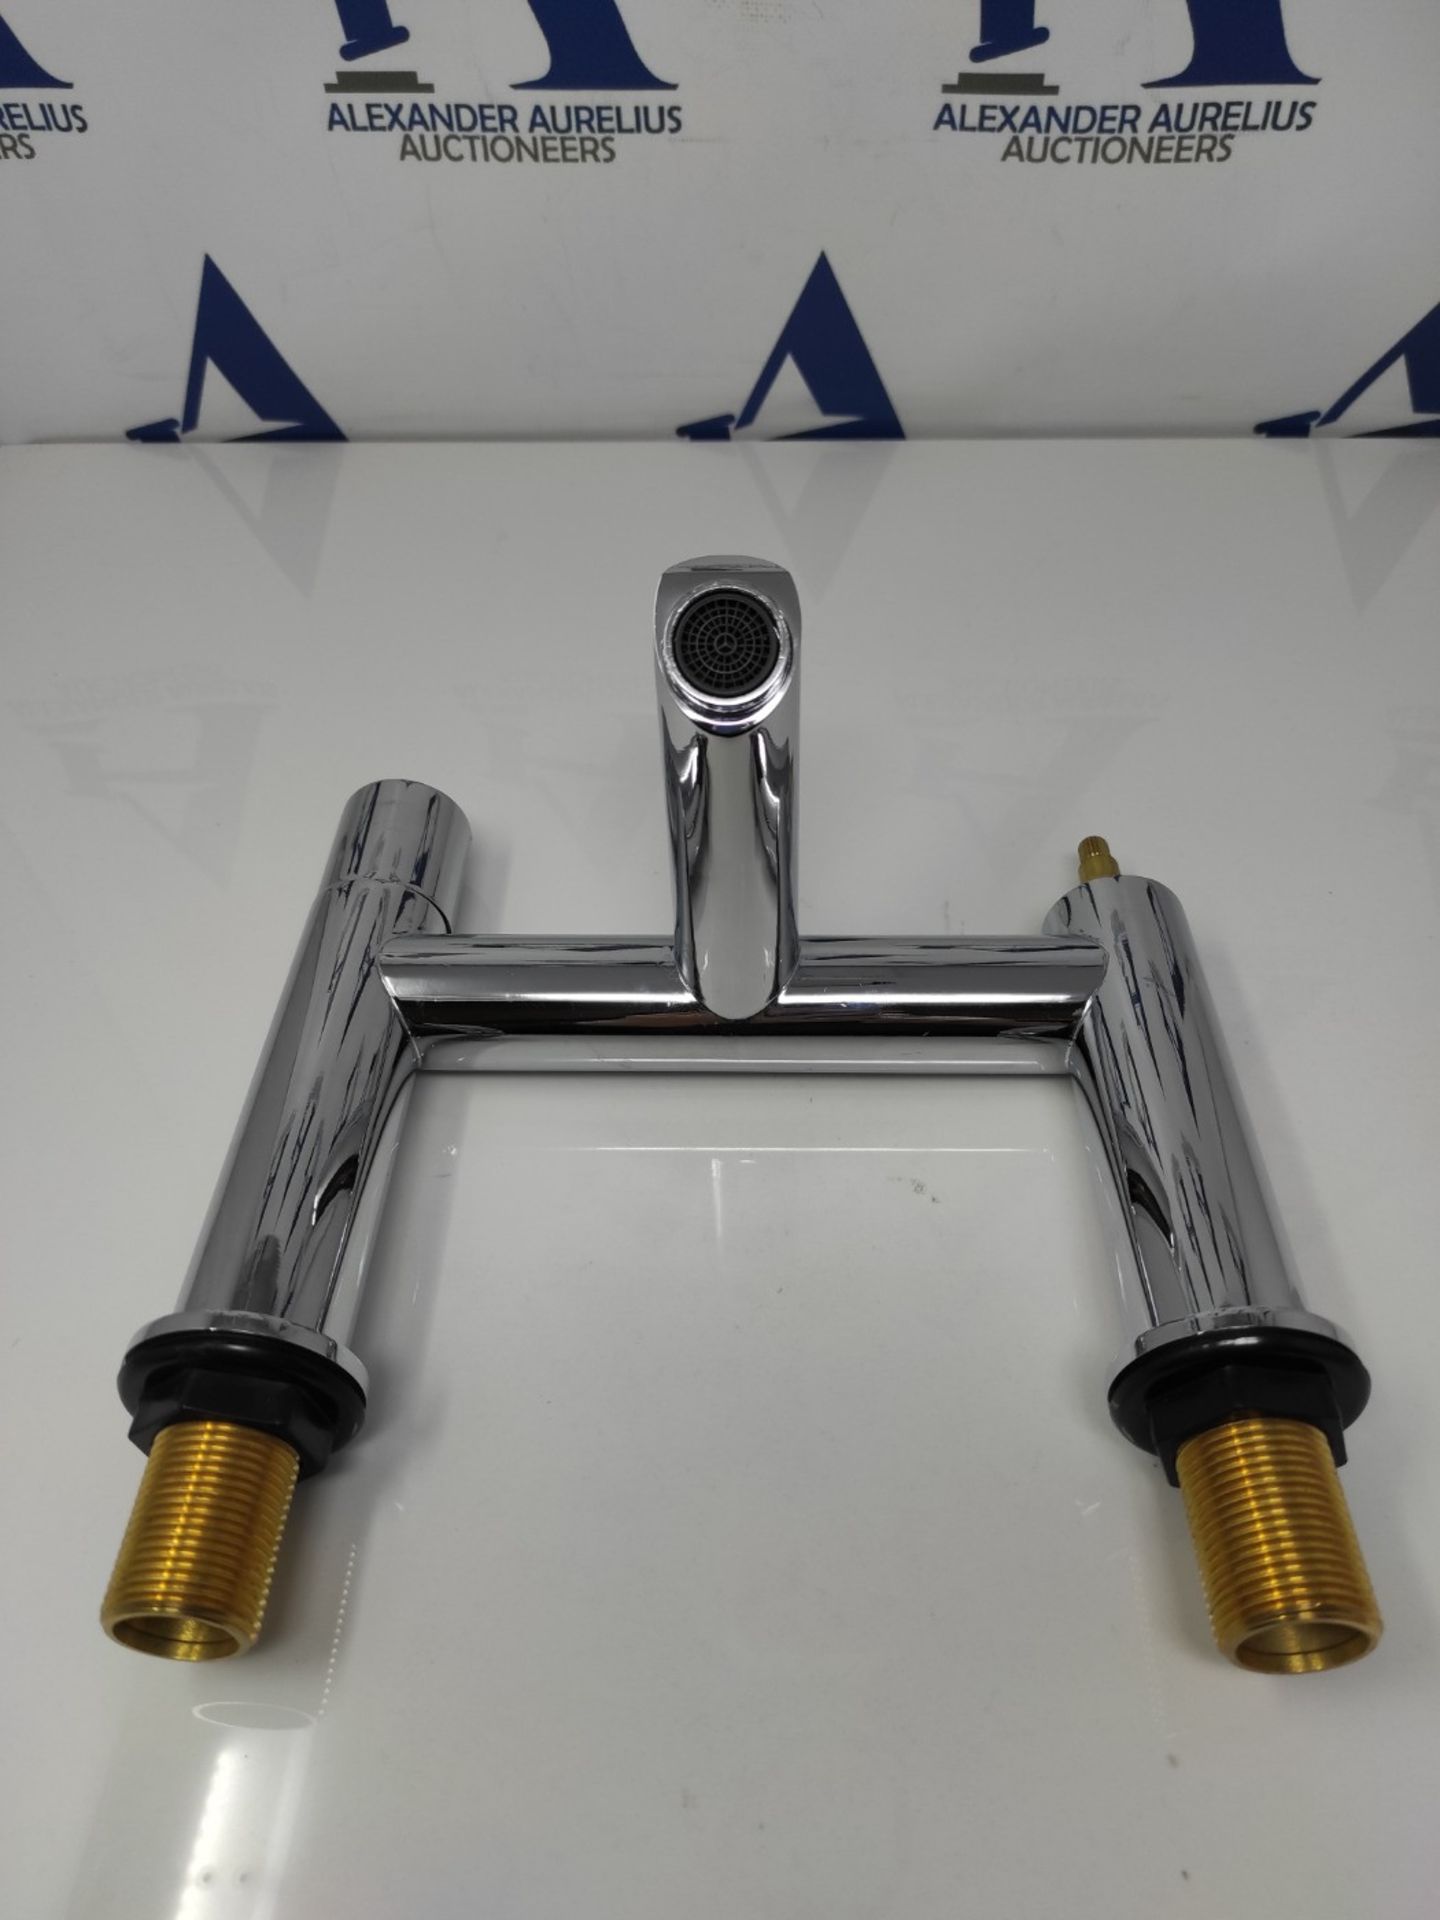 [INCOMPLETE] Luckyhome Bath Mixer Tap,Bathroom Double Lever Bath Tub Filler Mixer Tap - Image 2 of 3